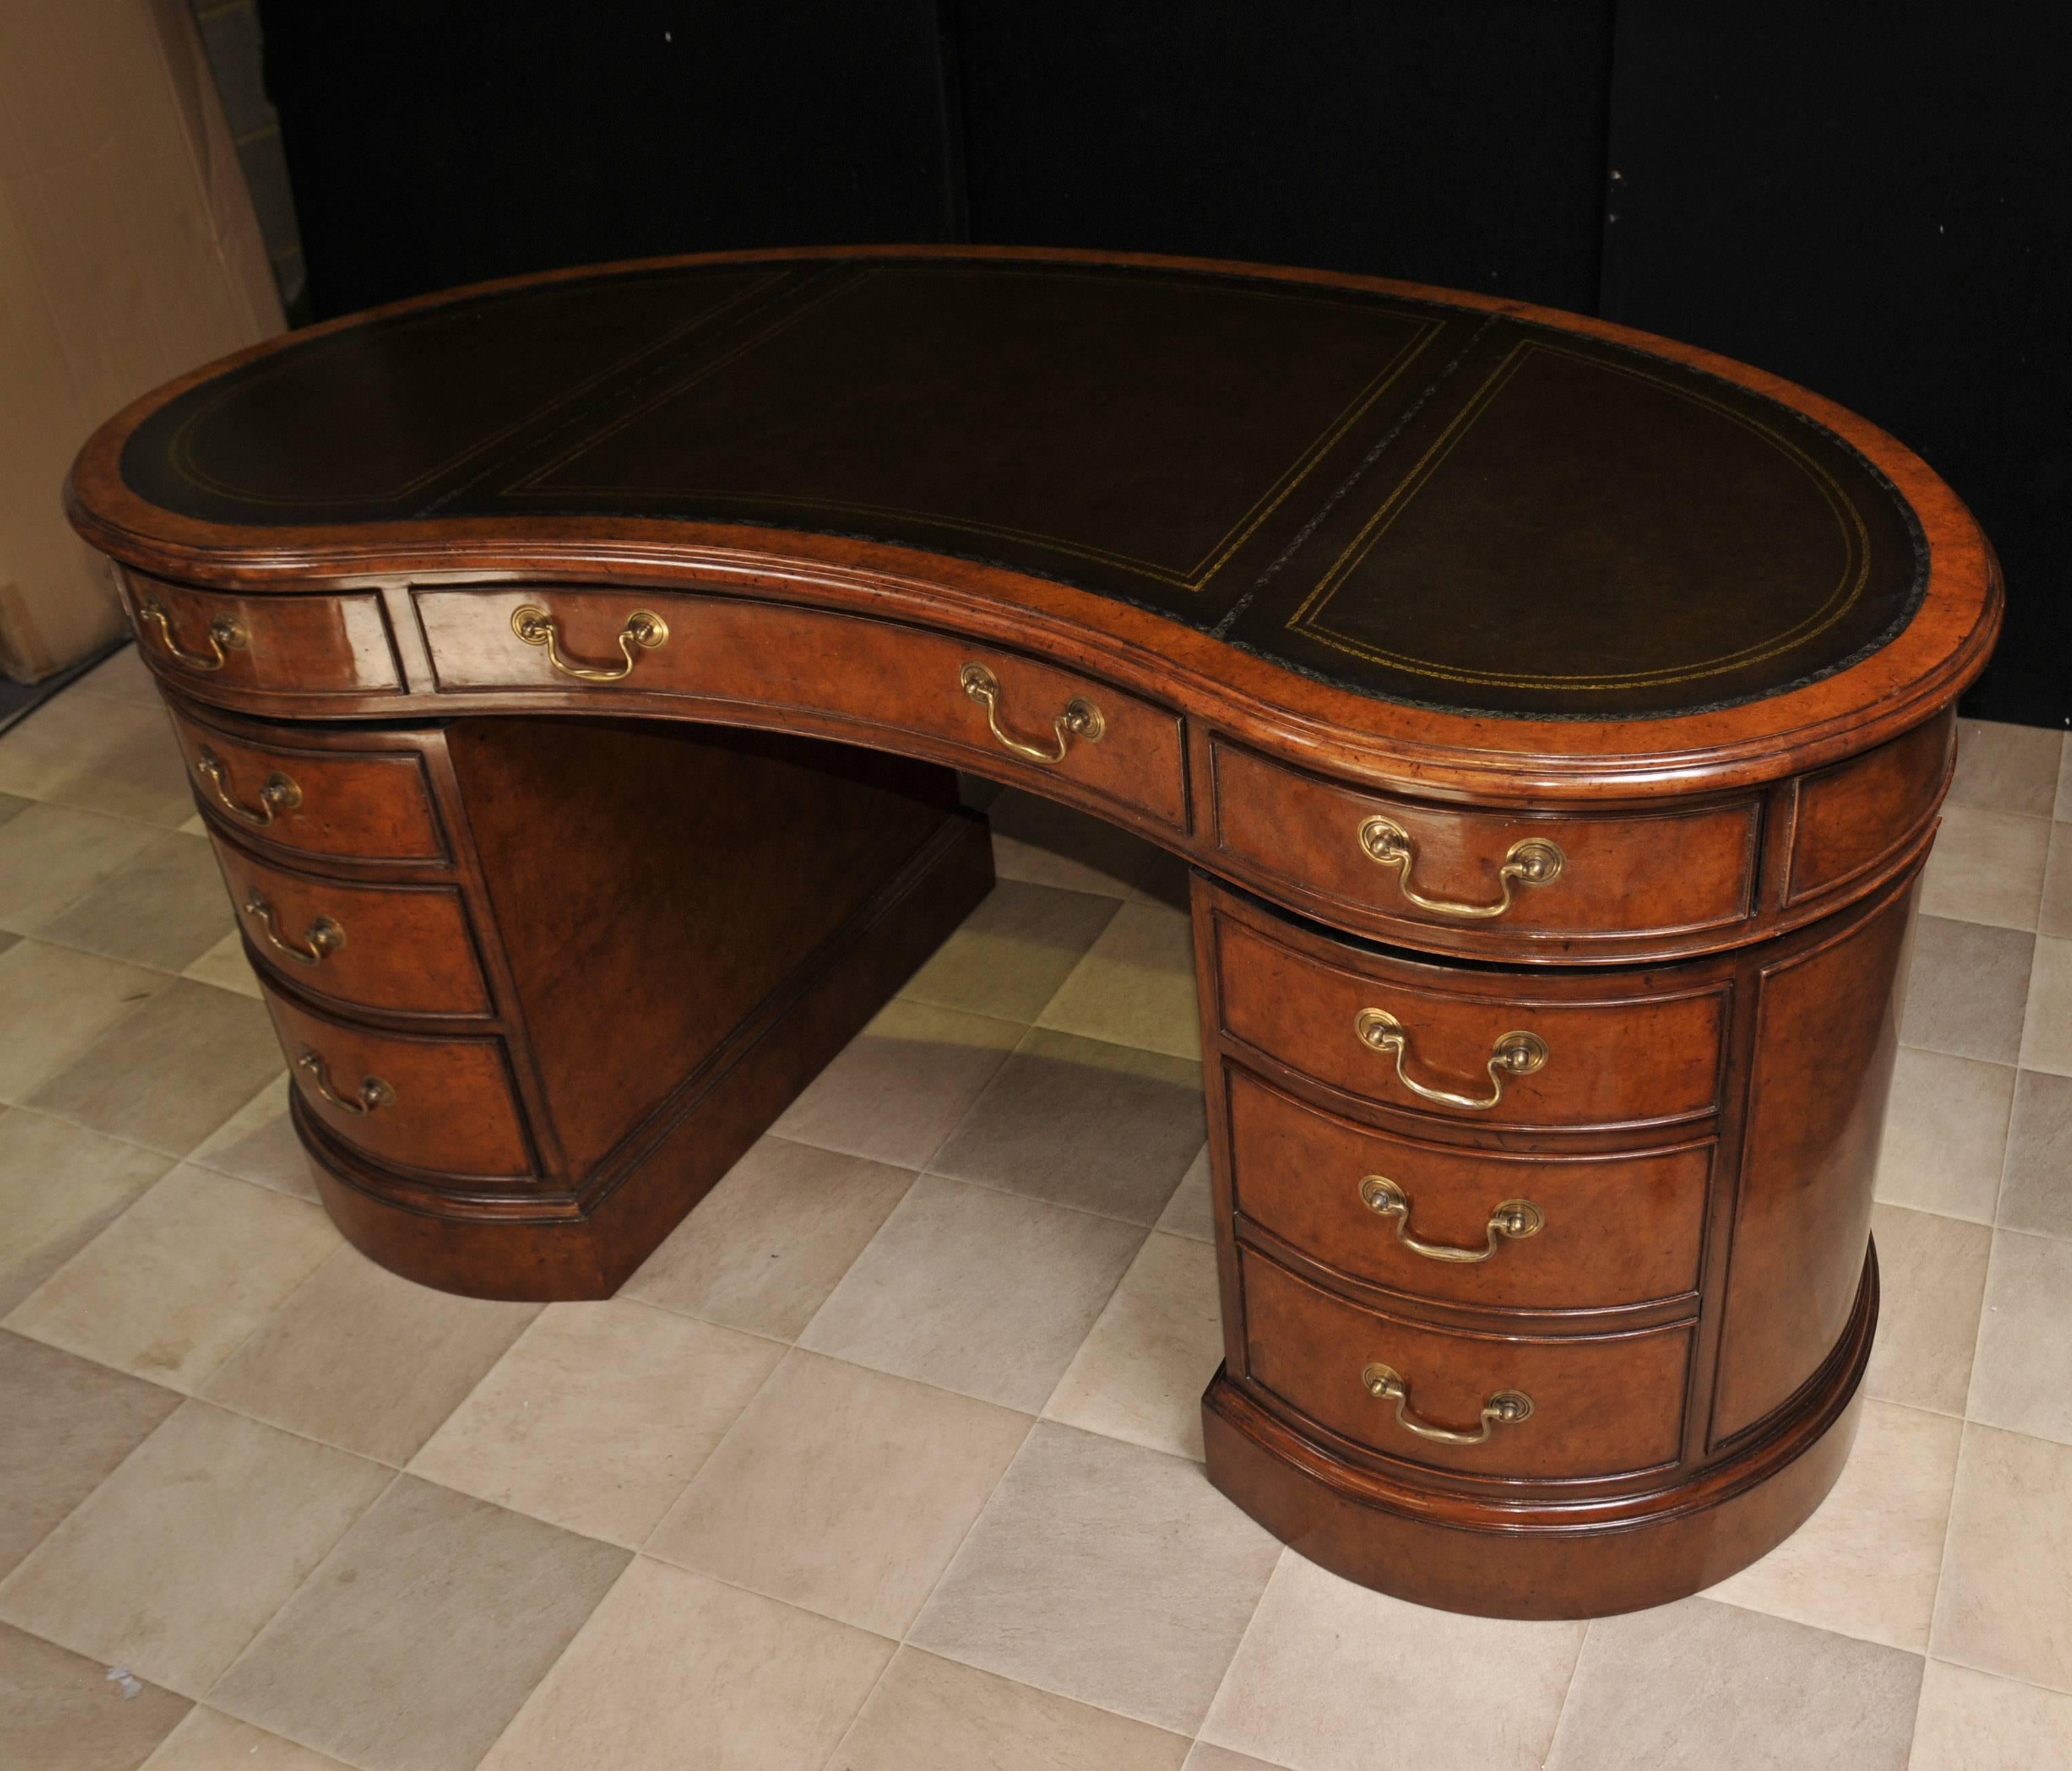 Regency Kidney Style Bean Desk in Walnut Writing Table In Excellent Condition For Sale In Potters Bar, Herts